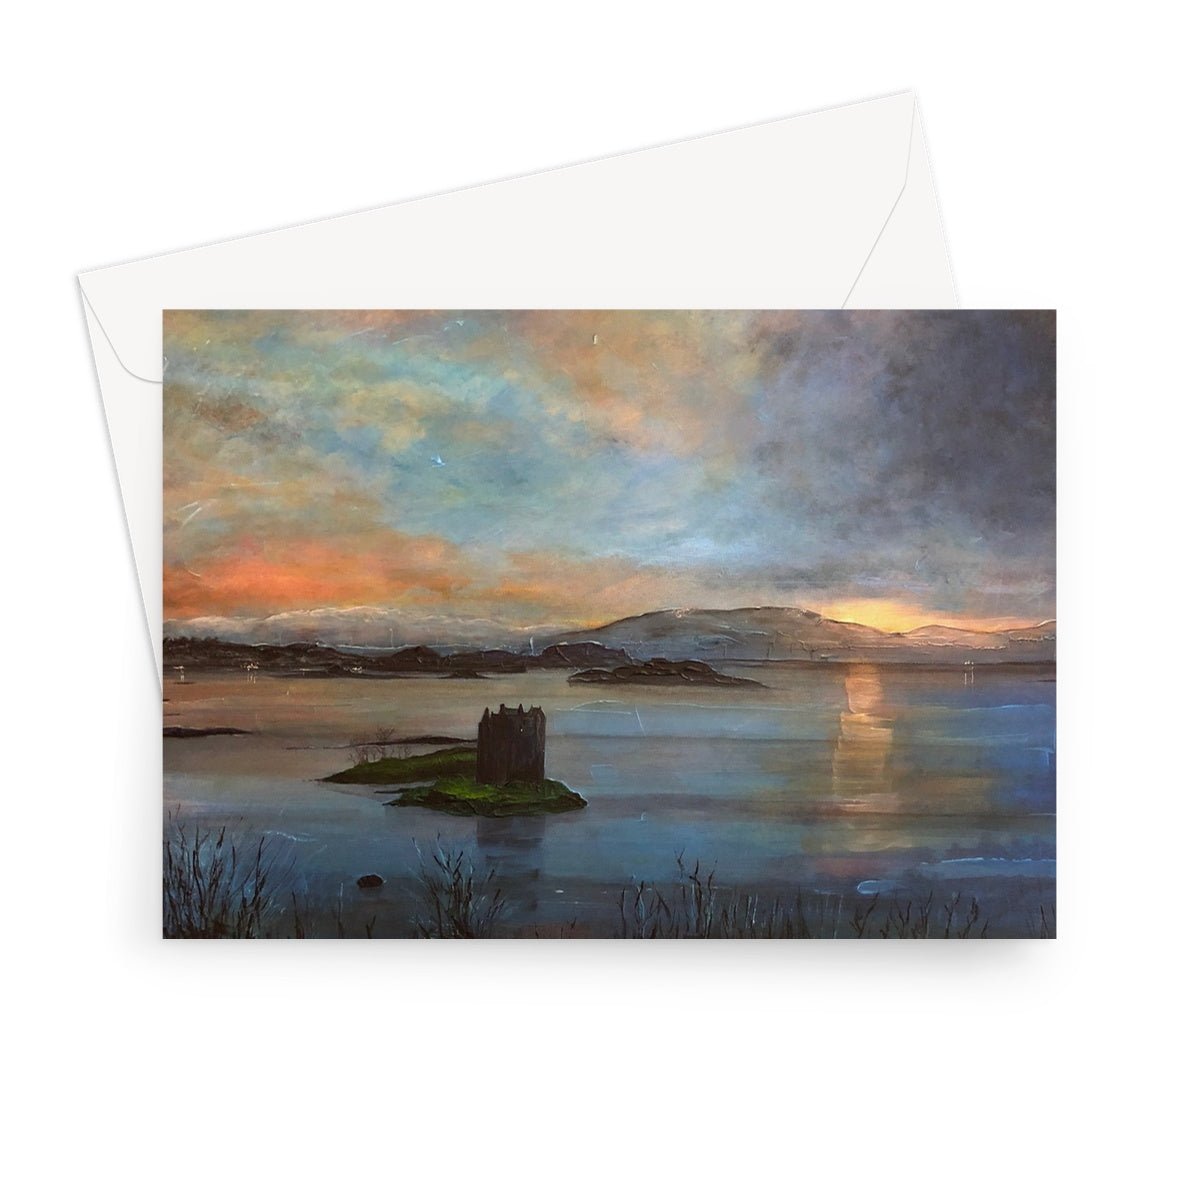 Castle Stalker Twilight Art Gifts Greeting Card-Greetings Cards-Scottish Castles Art Gallery-7"x5"-1 Card-Paintings, Prints, Homeware, Art Gifts From Scotland By Scottish Artist Kevin Hunter